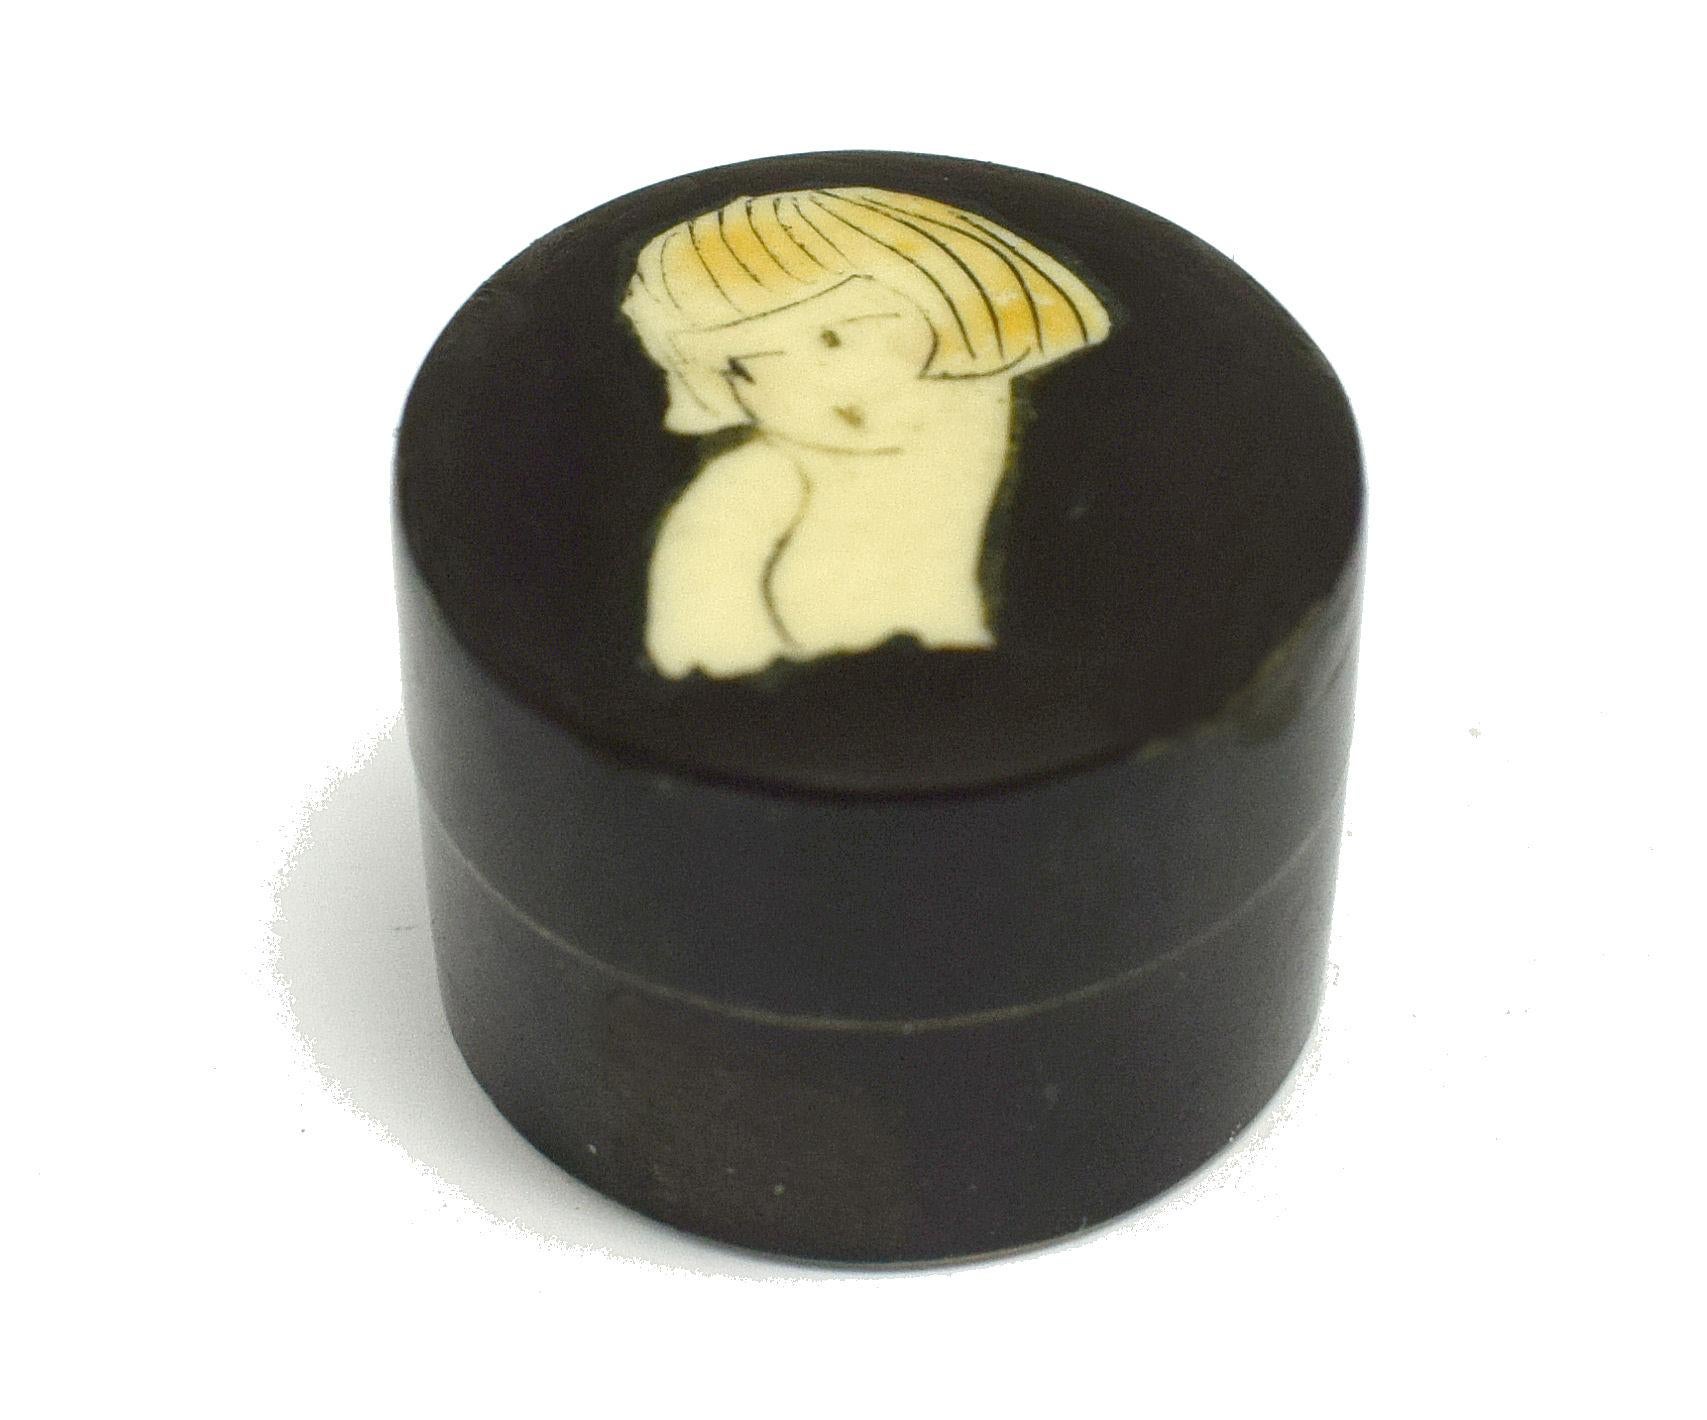 Miniature Art Deco 1930's powder box in bakelite with a hand painted 1920's girl with a bob haircut to the lid. There is still a residue of powder in the base. This piece is likely an item carried in an evening bag and allows for a touch up of make